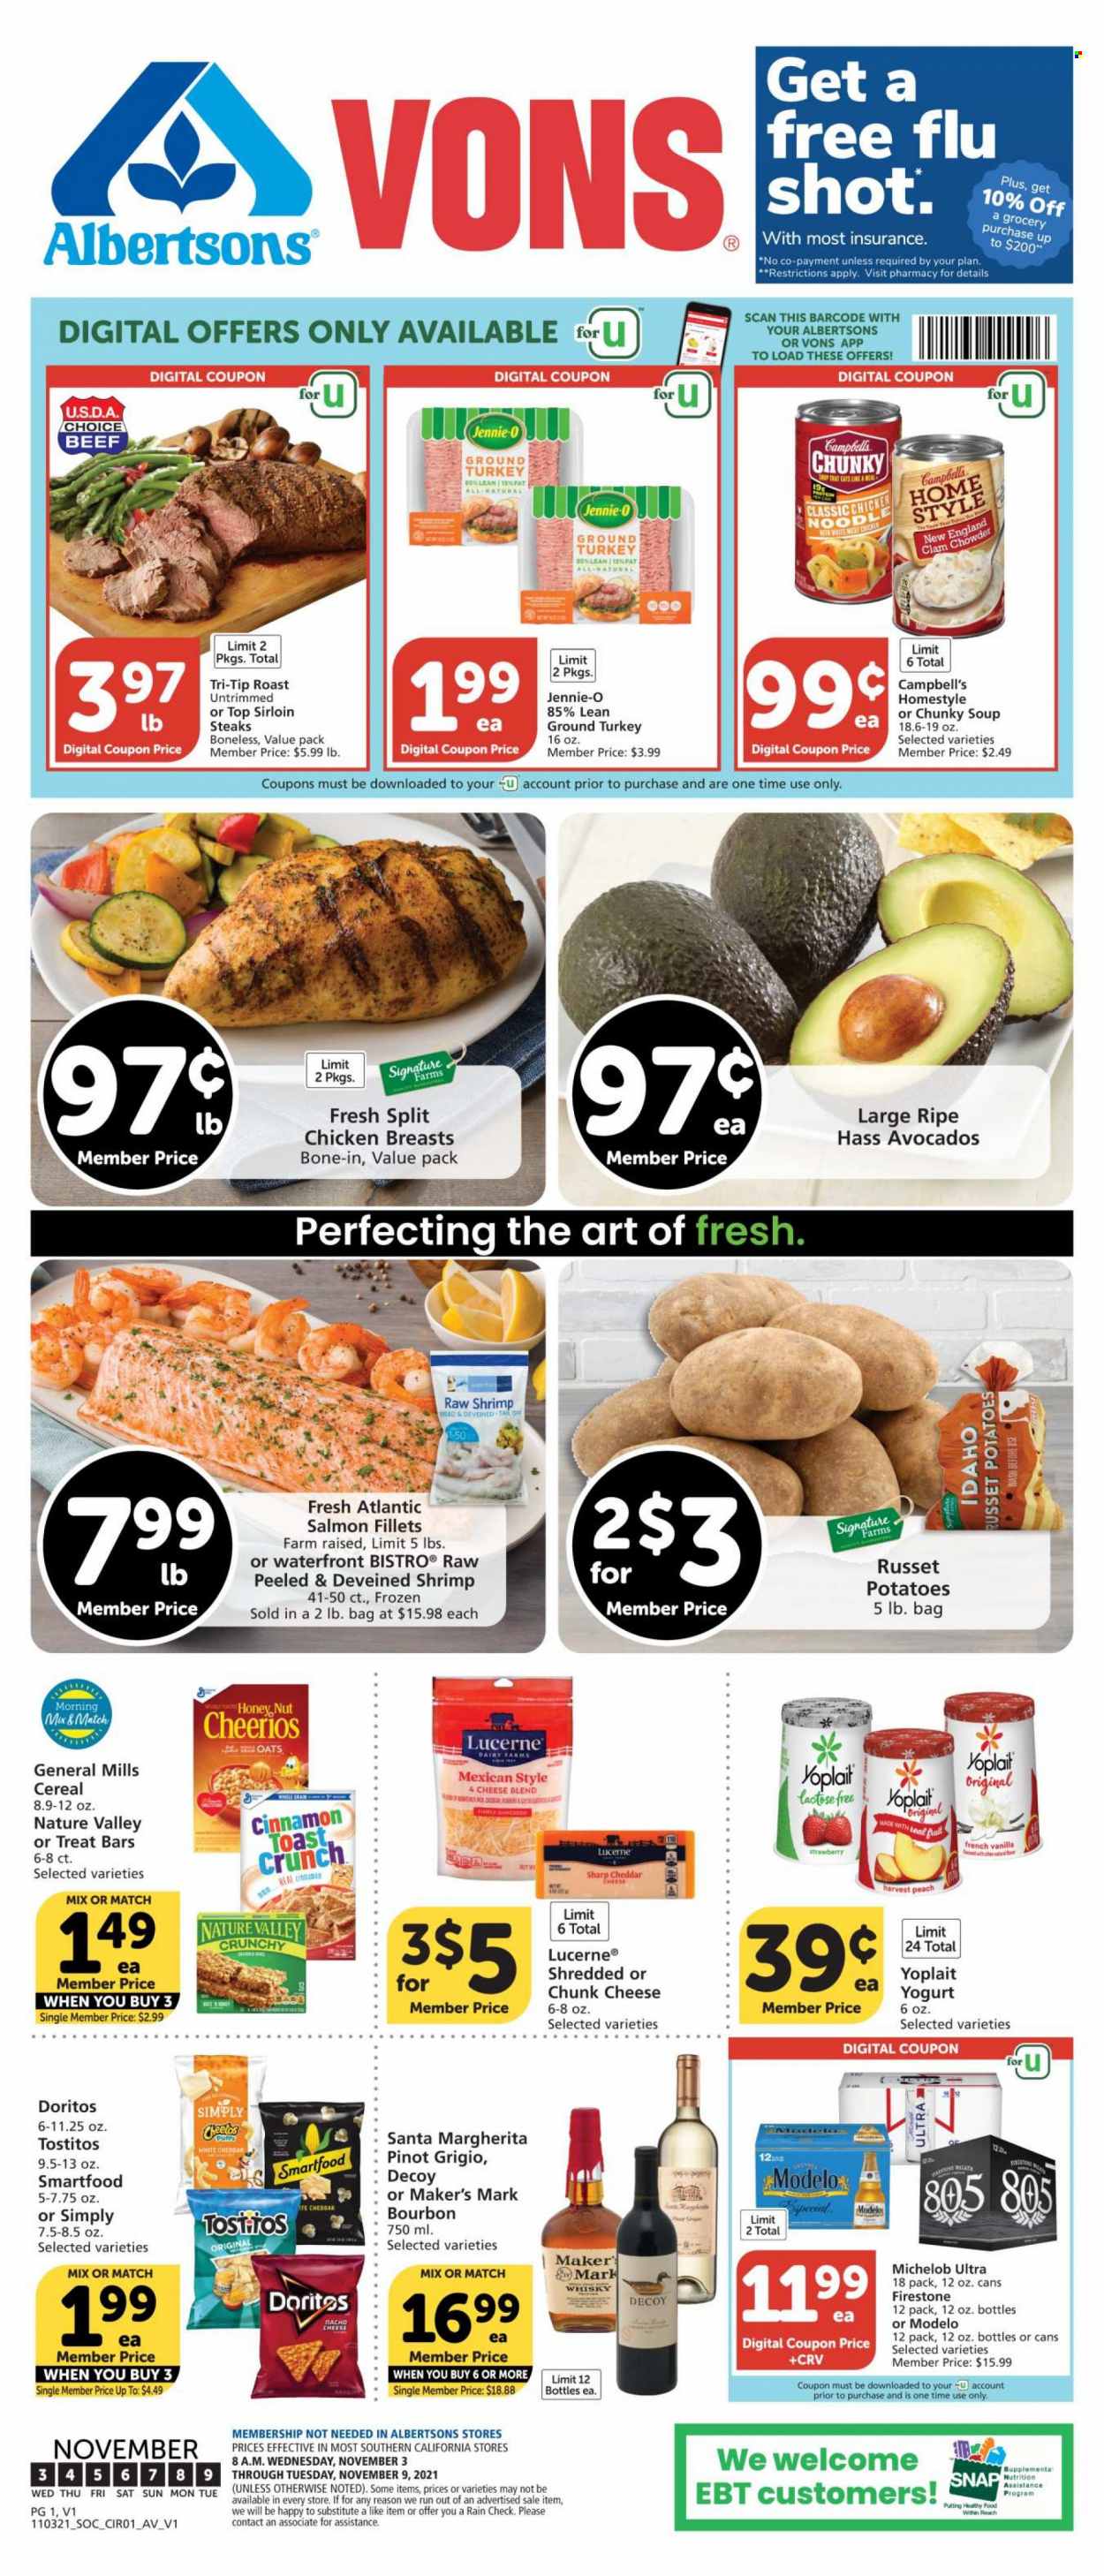 thumbnail - Albertsons Flyer - 11/03/2021 - 11/09/2021 - Sales products - russet potatoes, potatoes, avocado, salmon, salmon fillet, shrimps, Campbell's, soup, cheddar, cheese, chunk cheese, yoghurt, Yoplait, Santa, Doritos, Smartfood, Tostitos, oats, clam chowder, cereals, Cheerios, Nature Valley, cinnamon, white wine, wine, Pinot Grigio, whisky, beer, Modelo, ground turkey, chicken breasts, steak, sirloin steak, Michelob. Page 1.